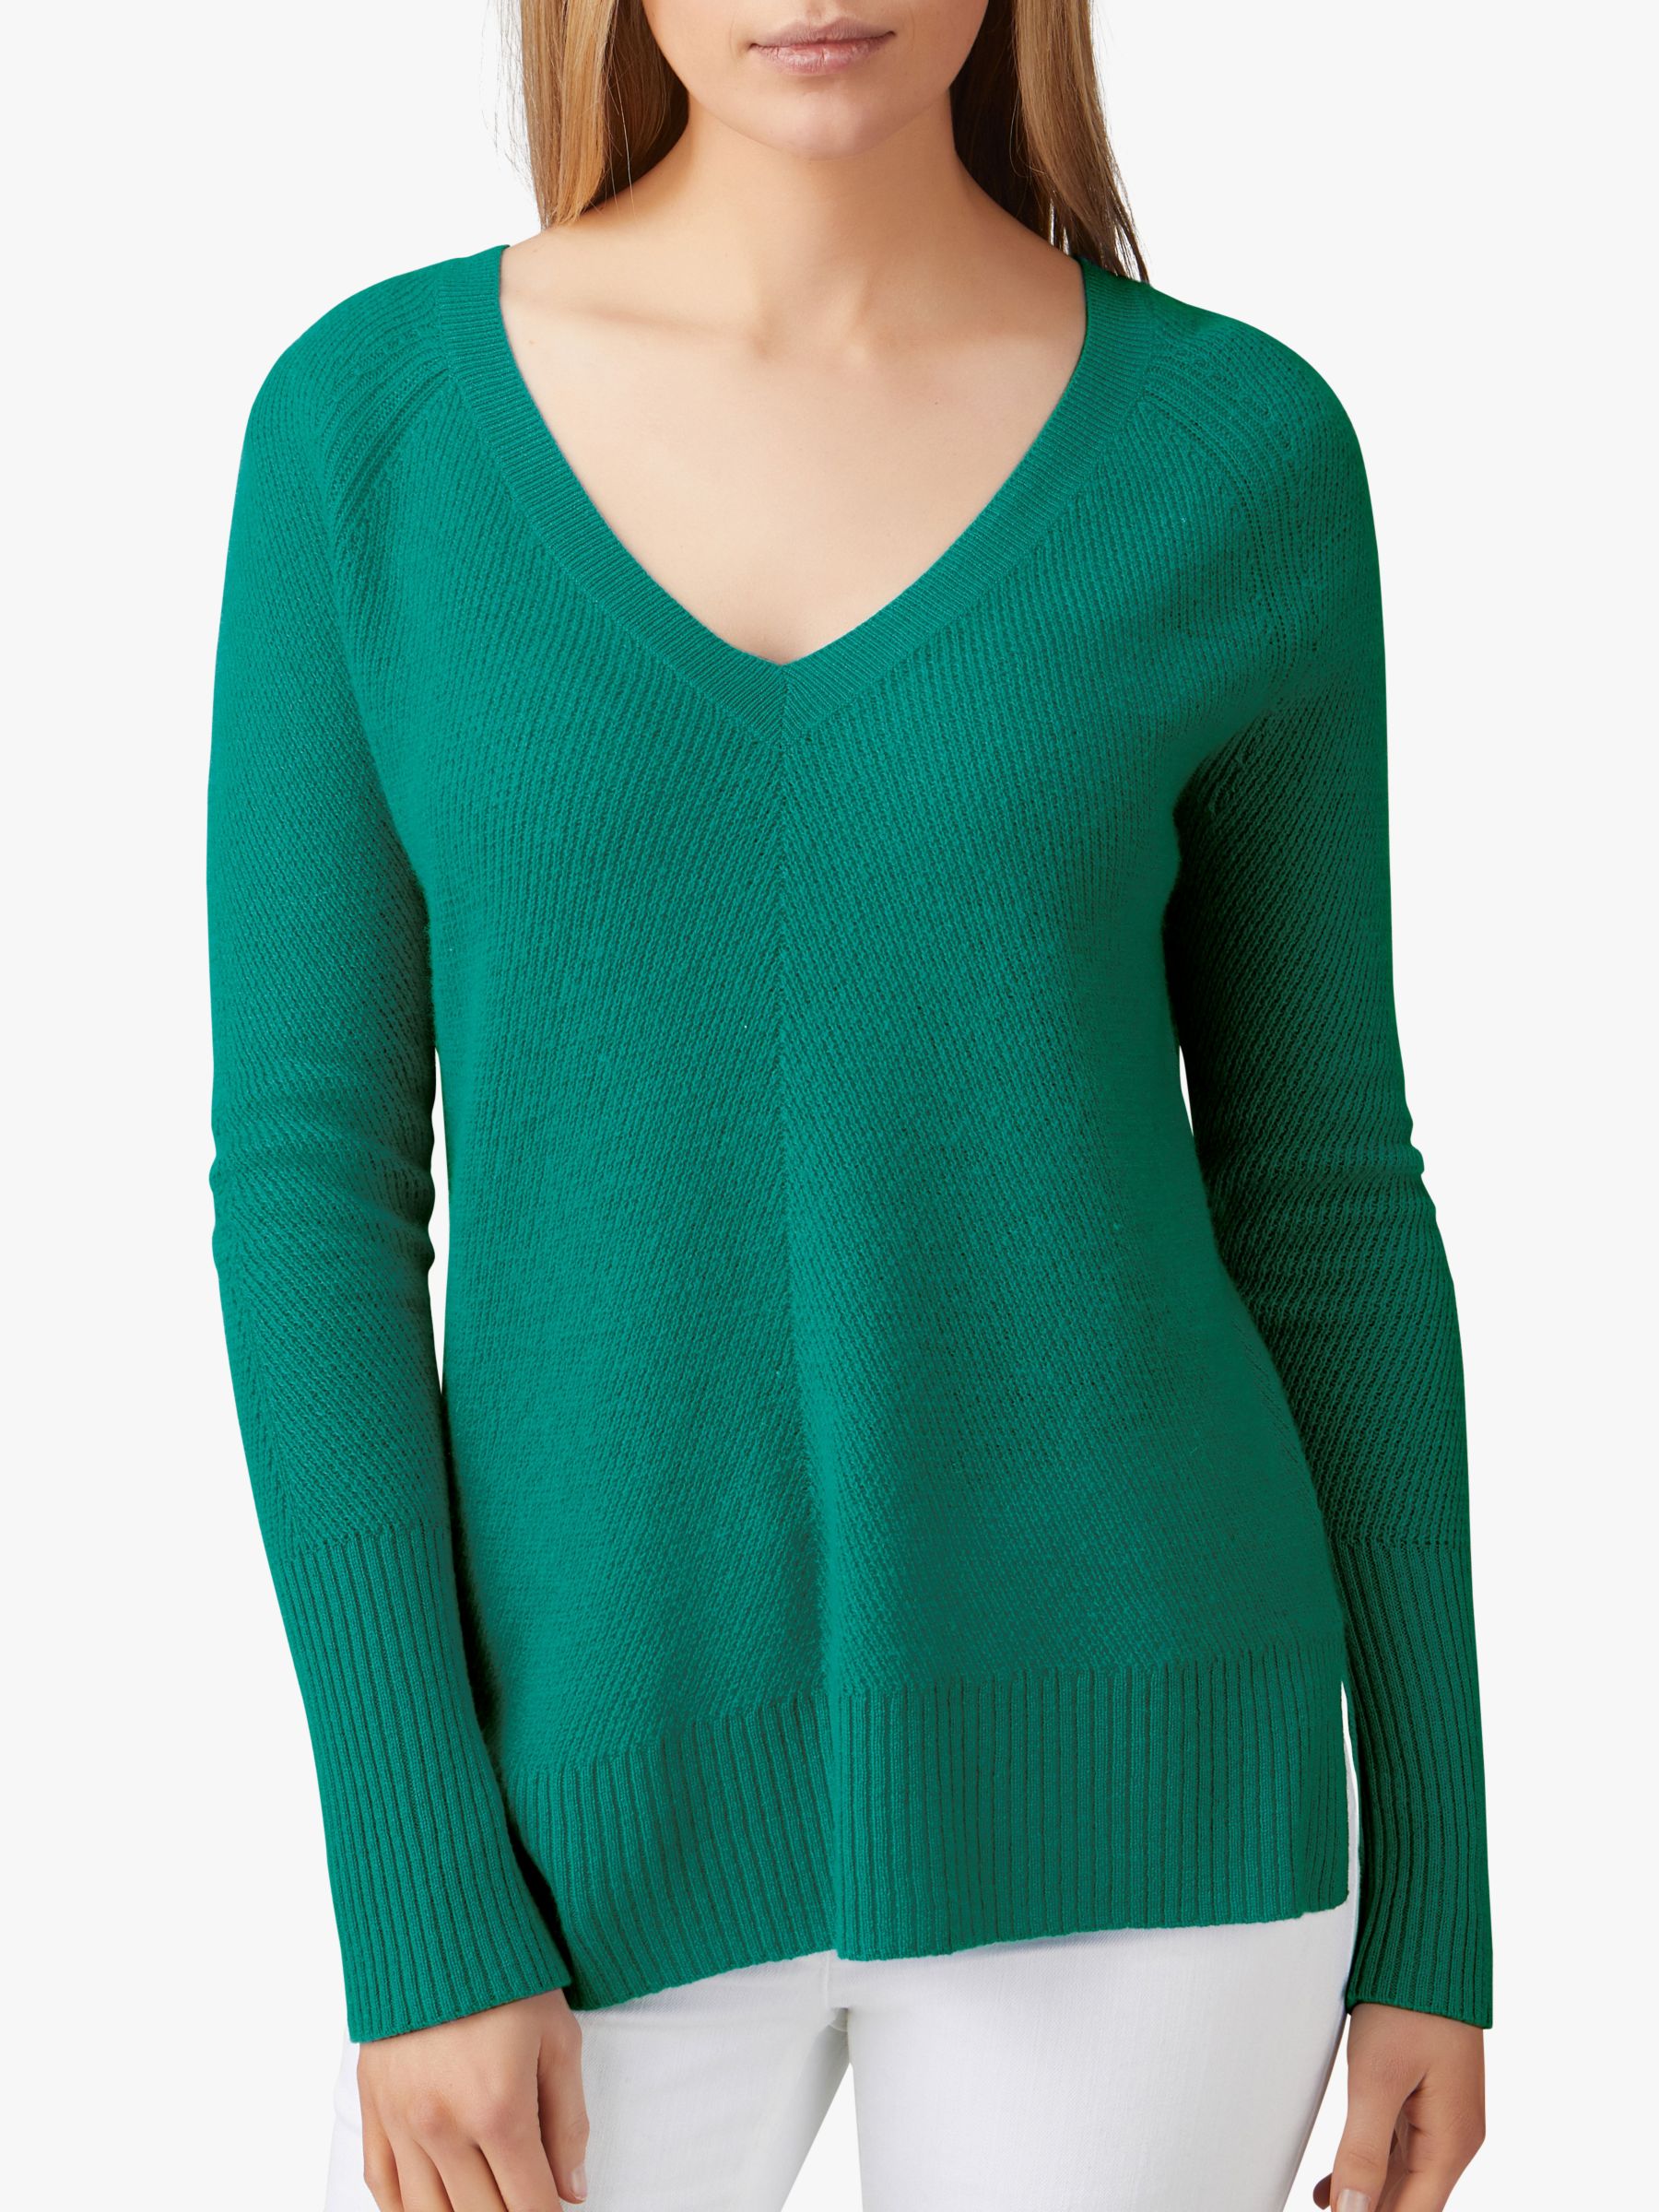 Pure Collection Gassato Cashmere Lofty Textured Jumper, Frosted Opal